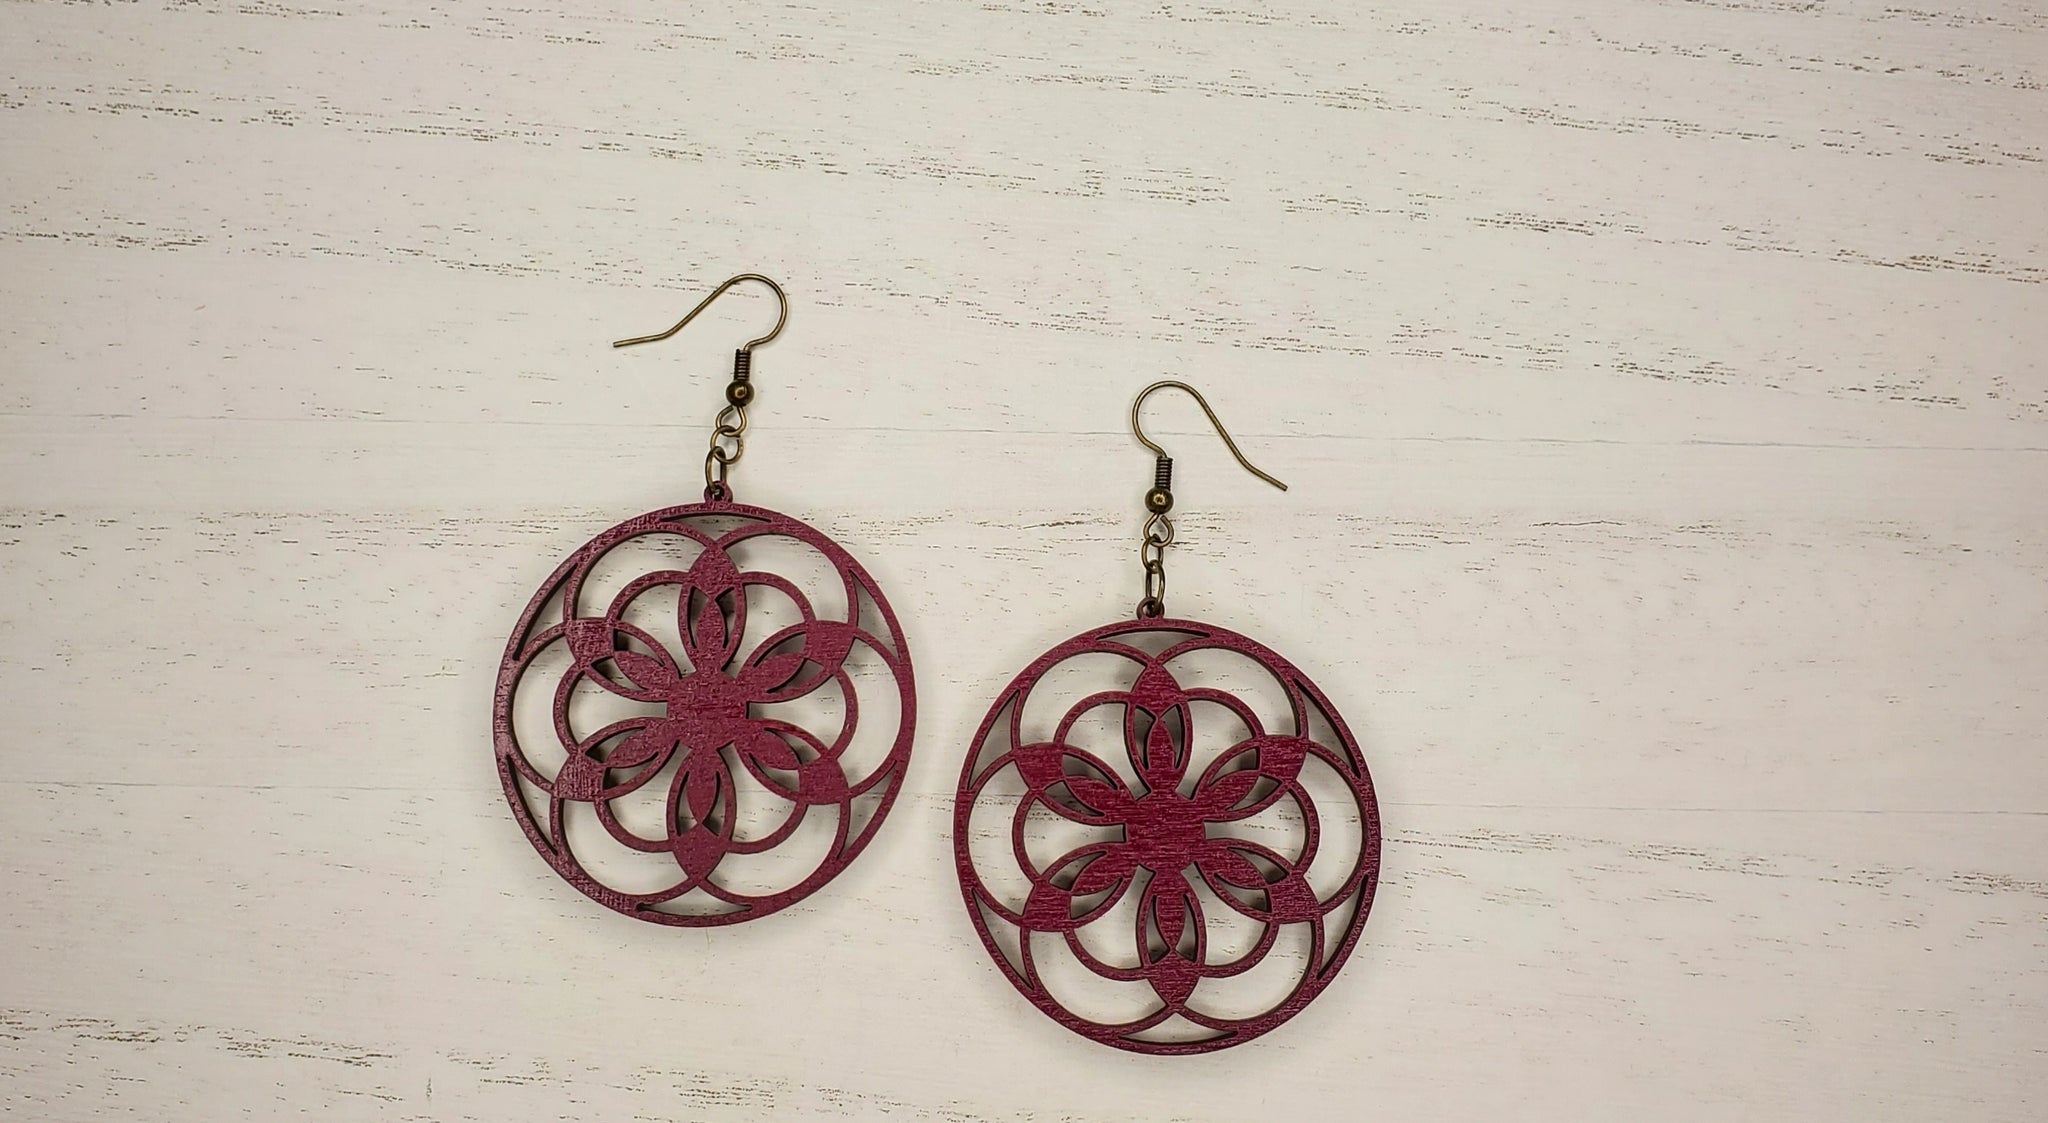 Rounded Floral Dangle Earrings